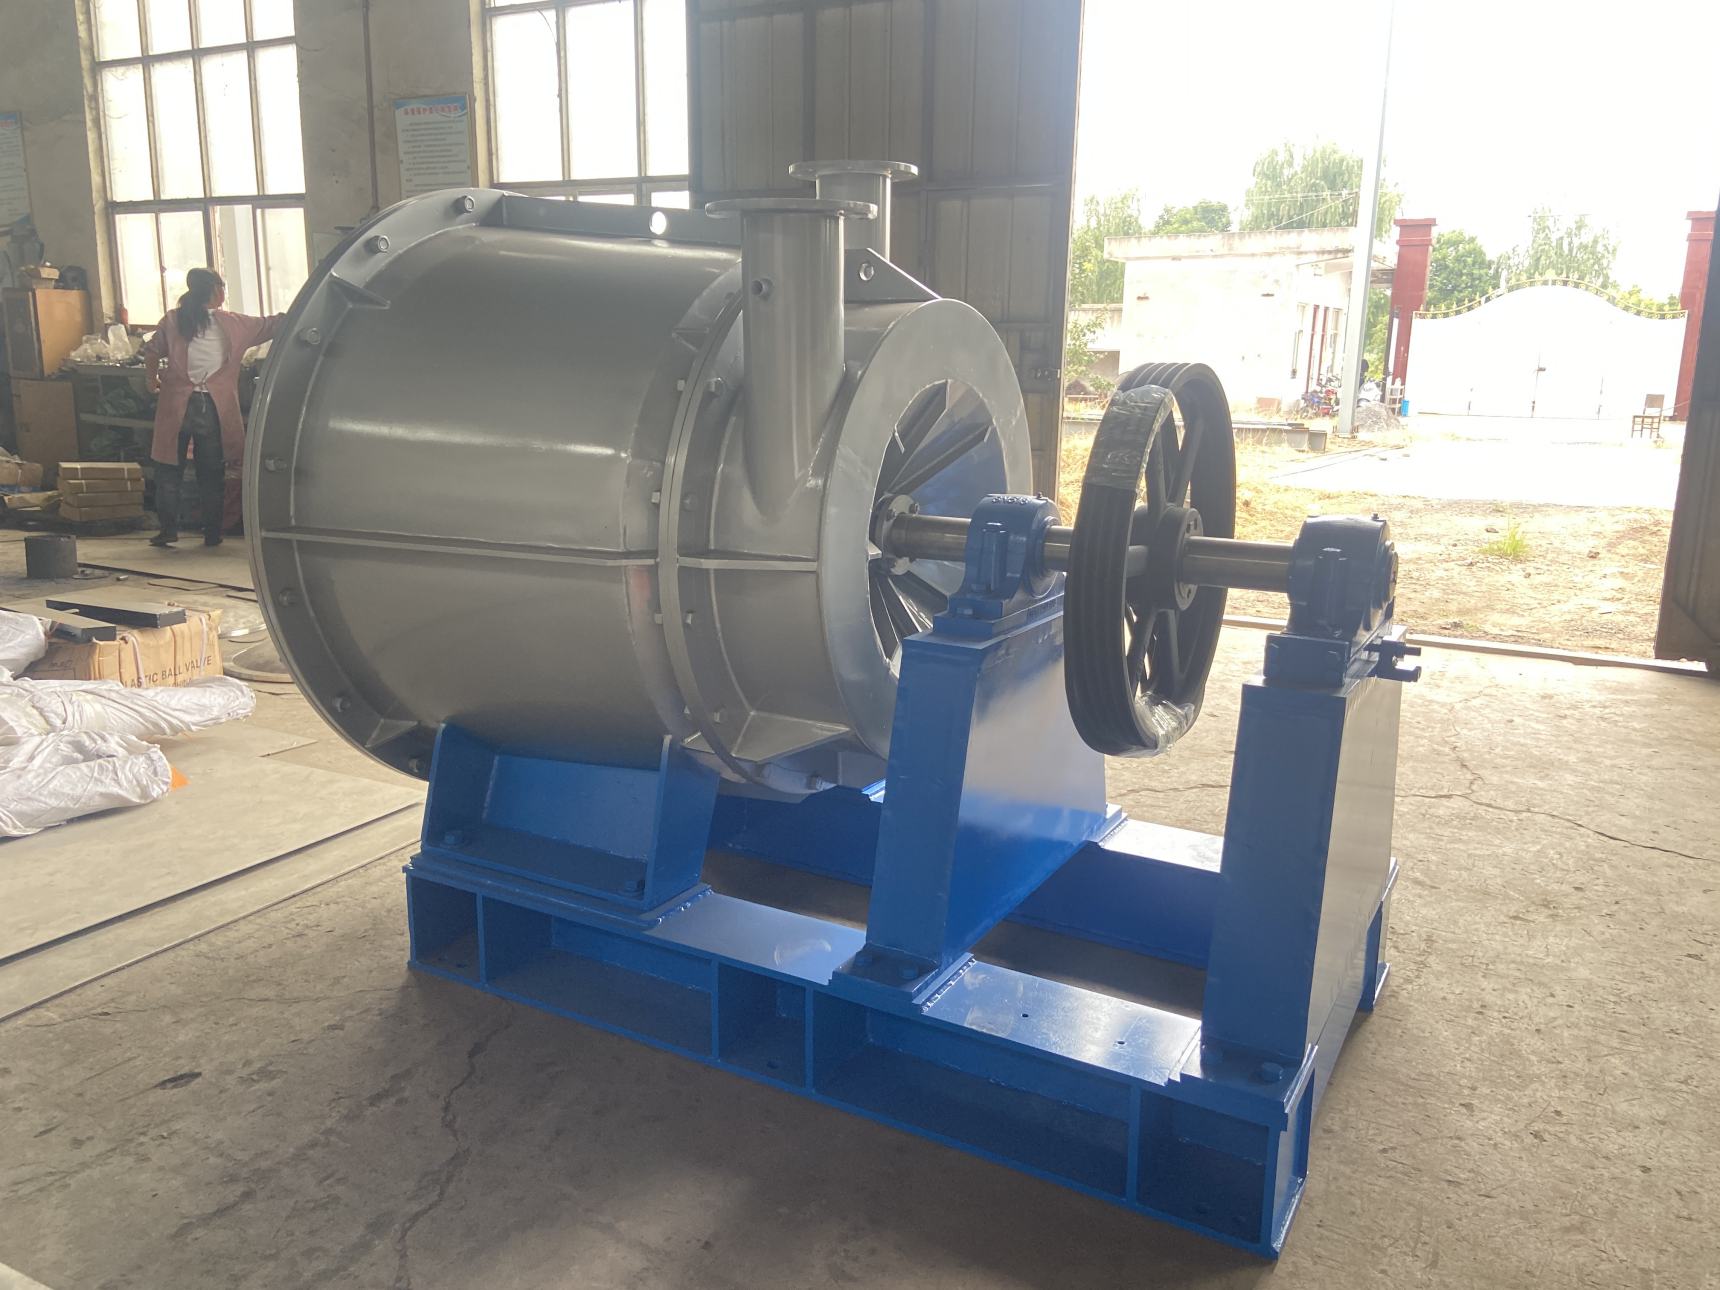 Paper pulp making machine recycled waste paper pulping equipment fiber separator in paper mill